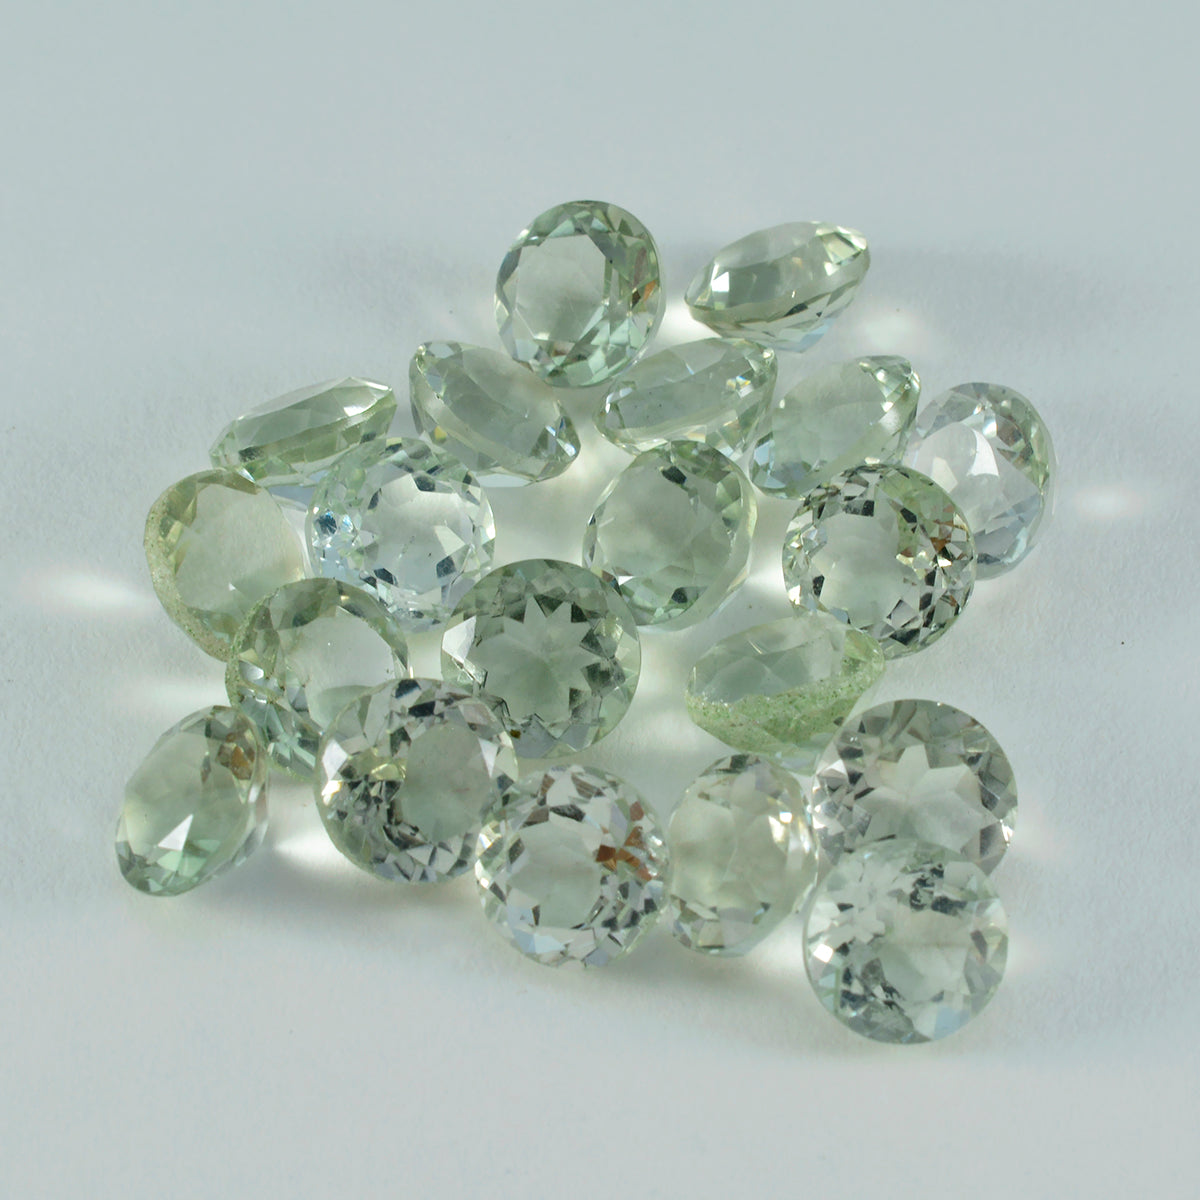 Riyogems 1PC Green Amethyst Faceted 6x6 mm Round Shape nice-looking Quality Loose Stone